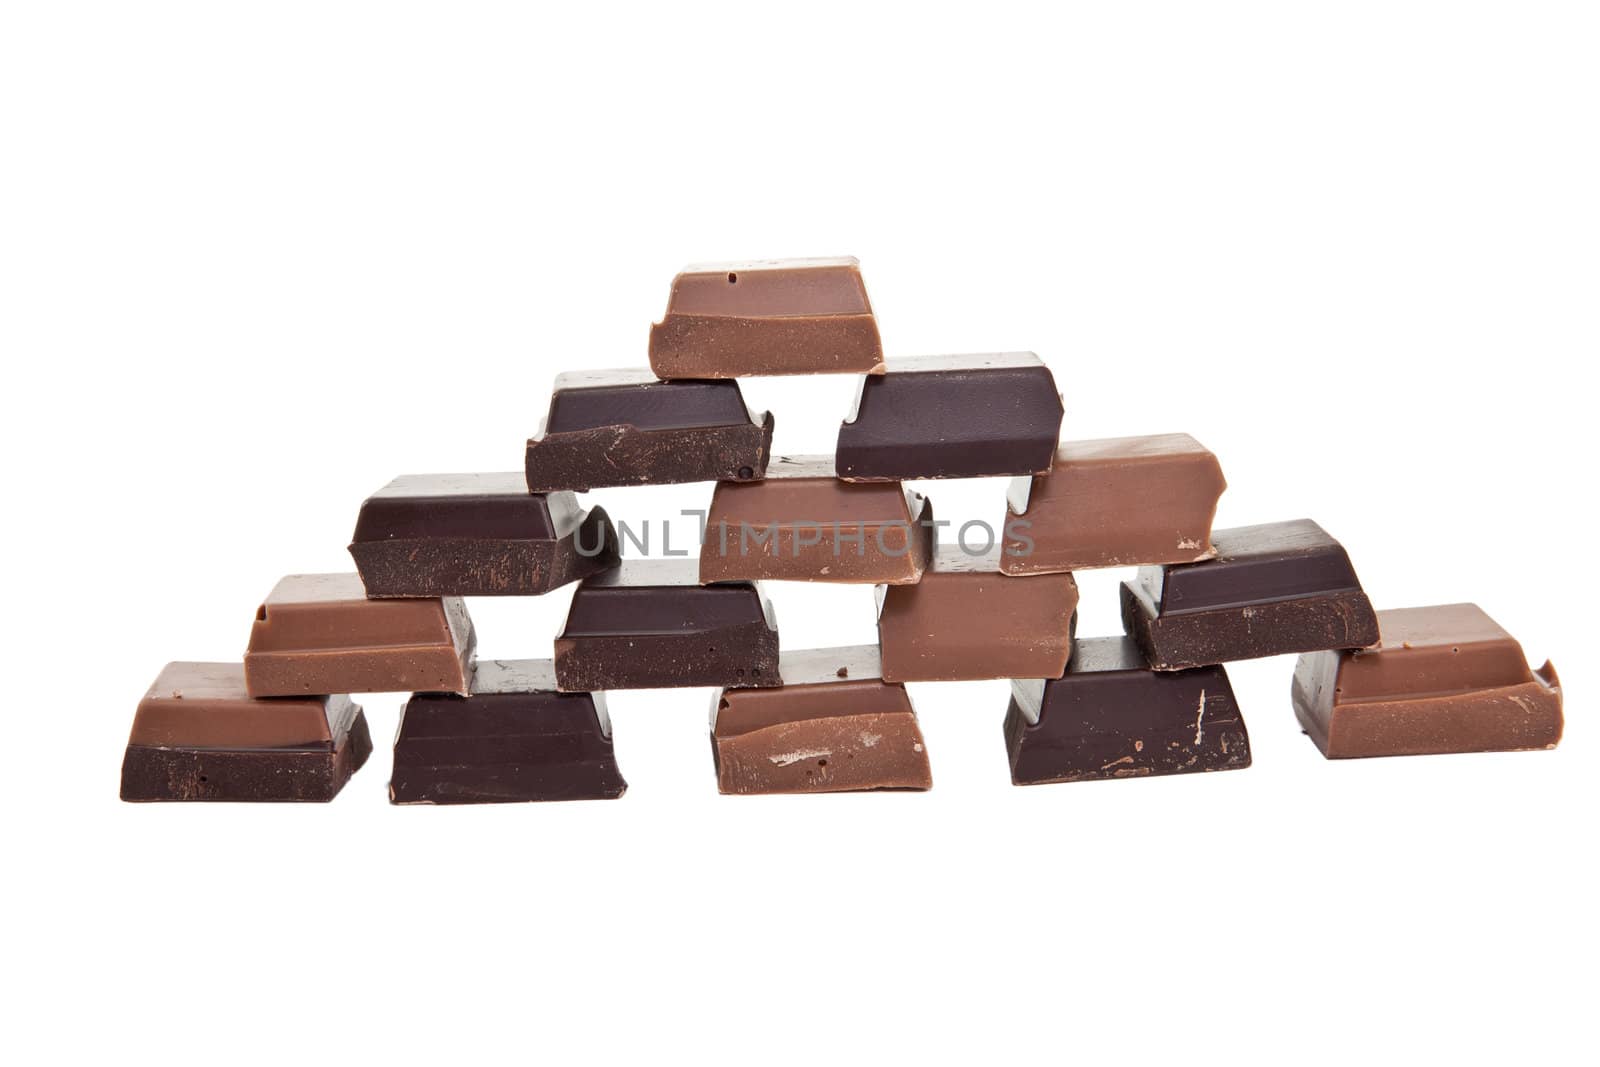 Chocolate pyramide from the front by Stootsy